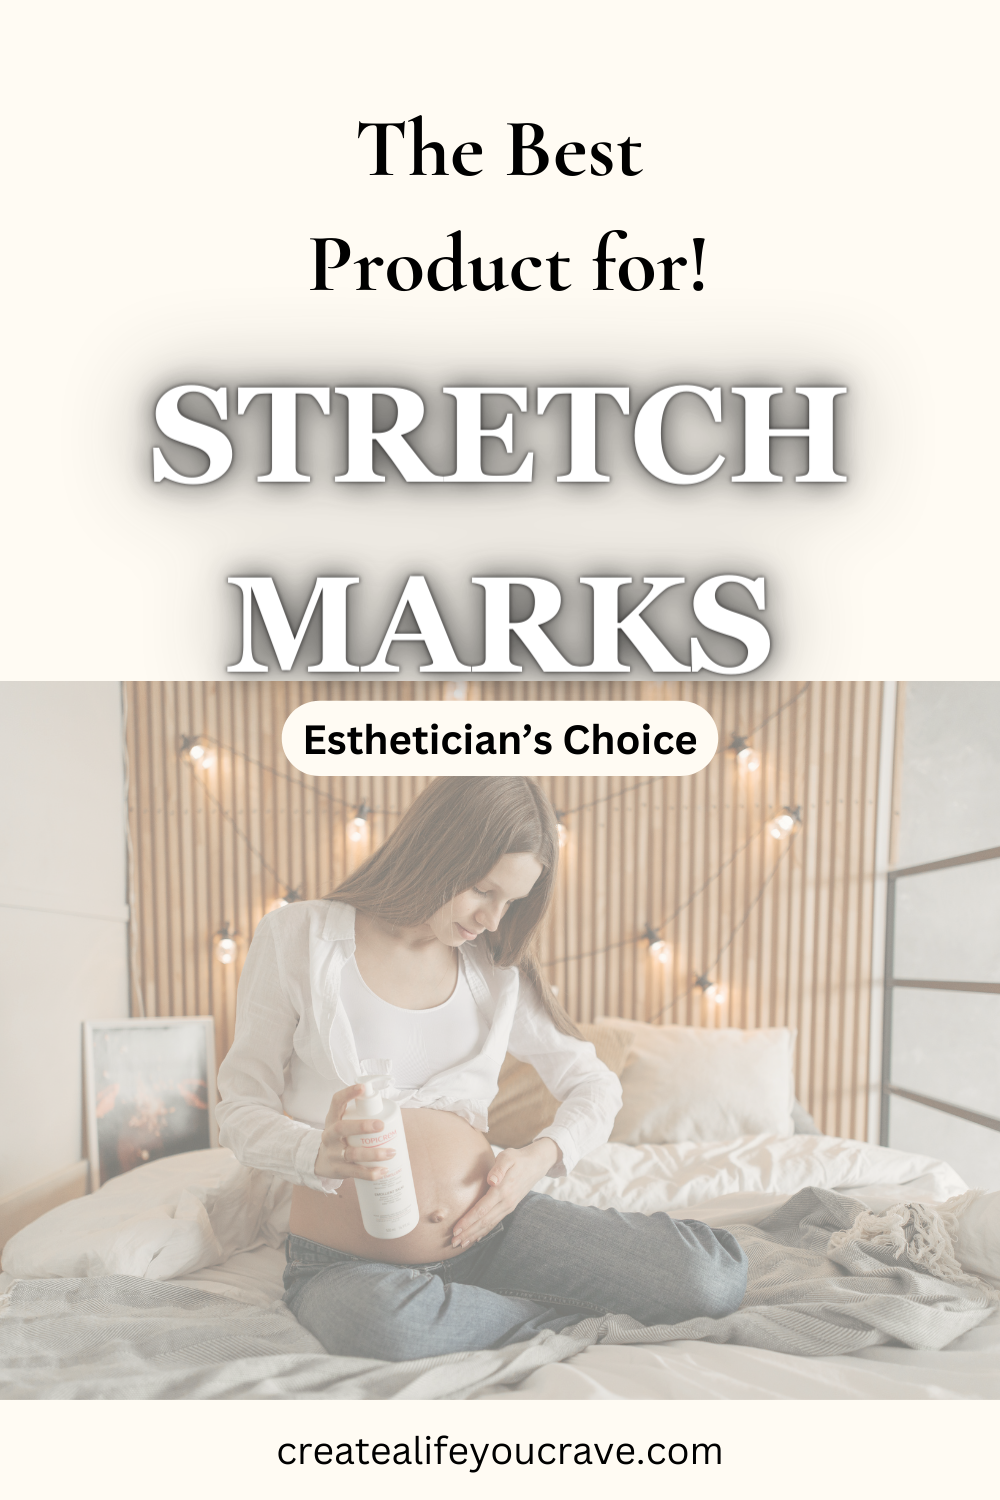 The Best Product for Stretch Marks!